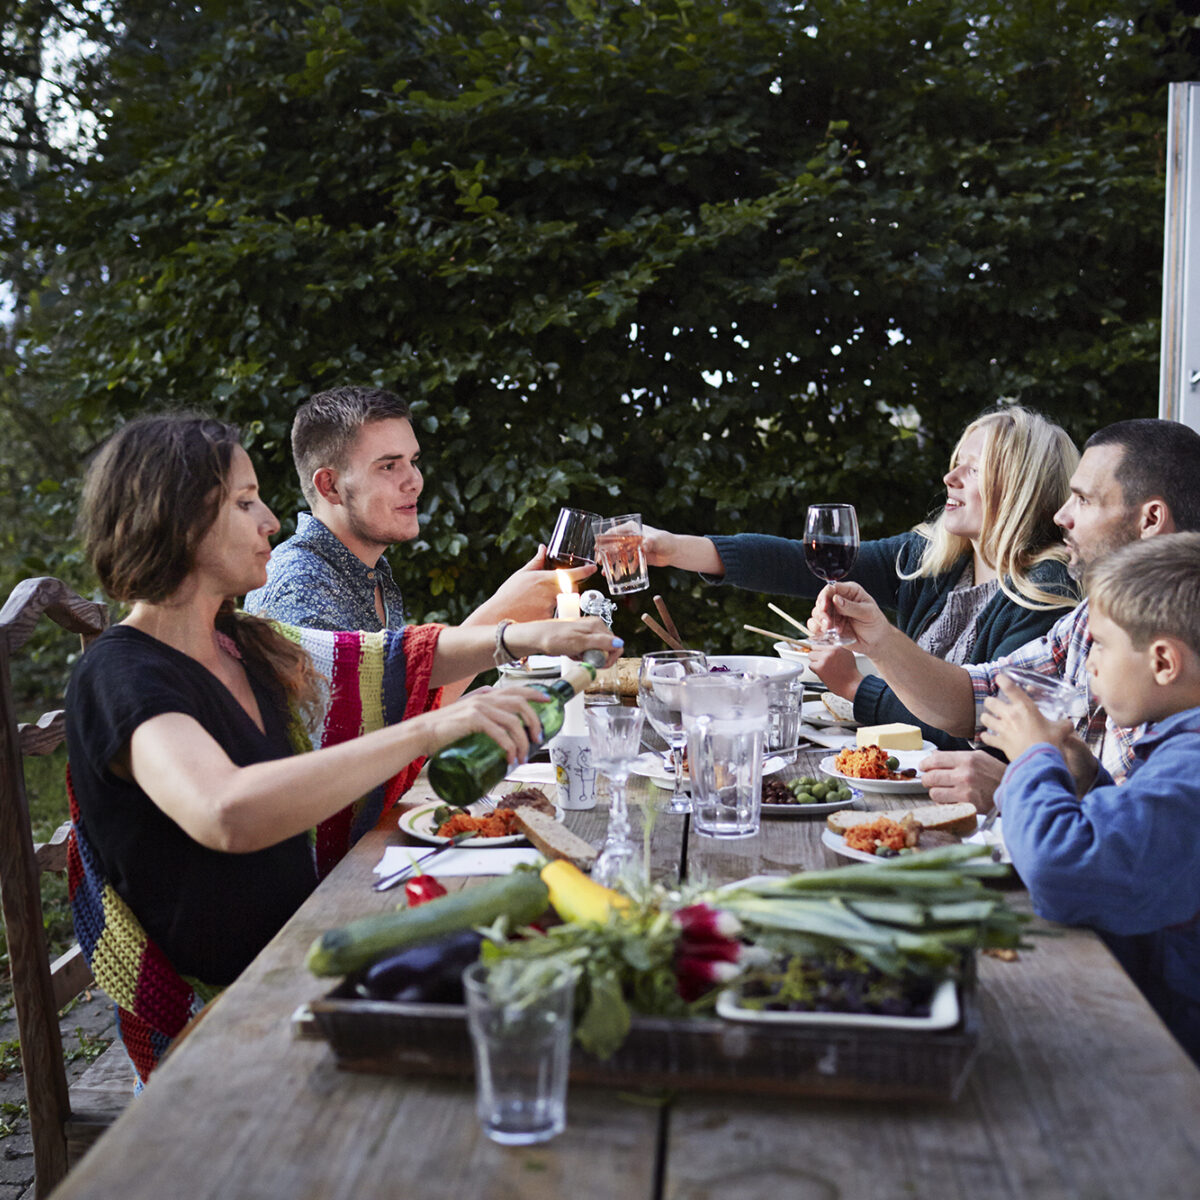 Jets image CAB image Dinner Family Toast Getty Images 465975819 small